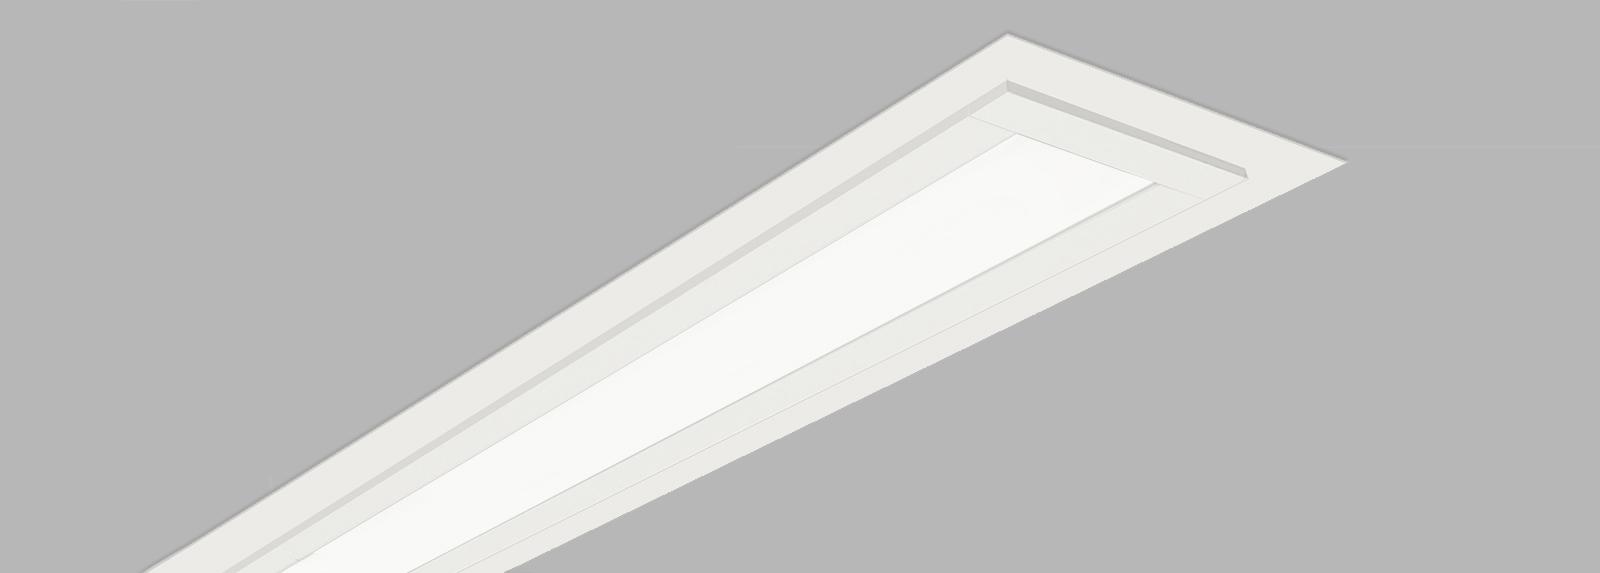 DRAK 100 | Recessed linear downlights for lighting replacement